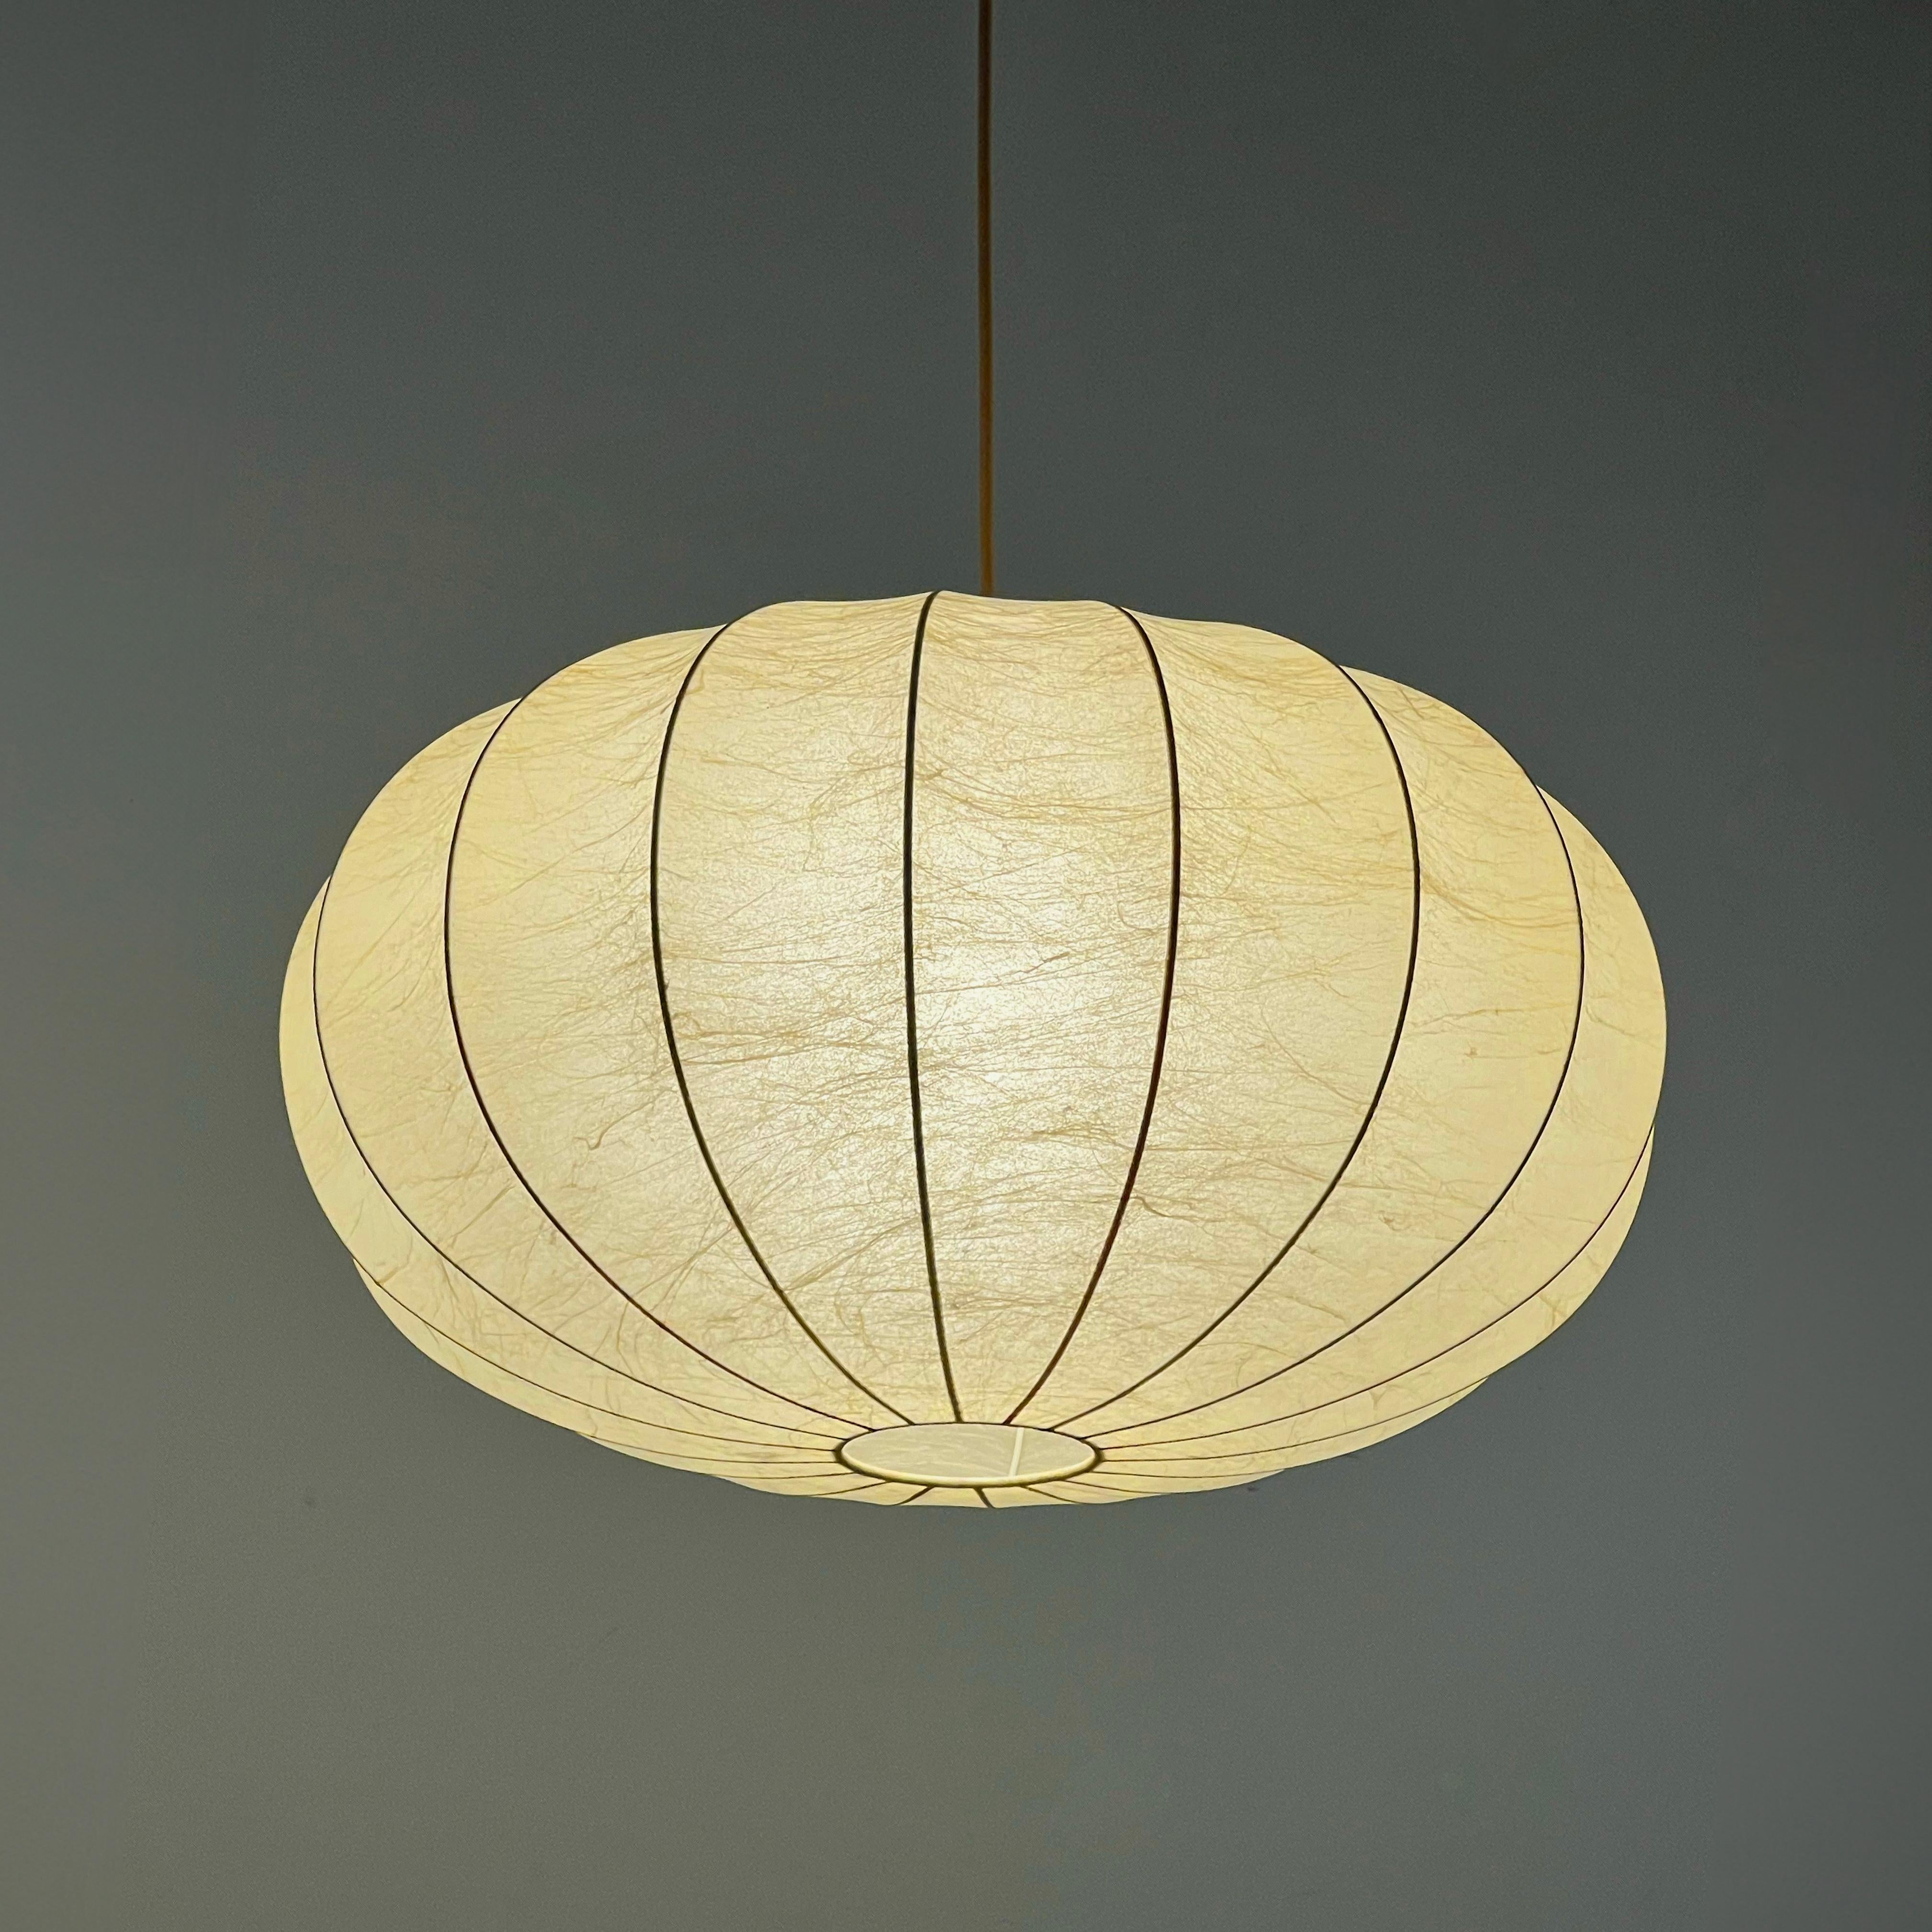 Metal 21.6 Inches Space Age Cocoon Pendant Lamp by Friedel Wauer for Goldkant Leuchten